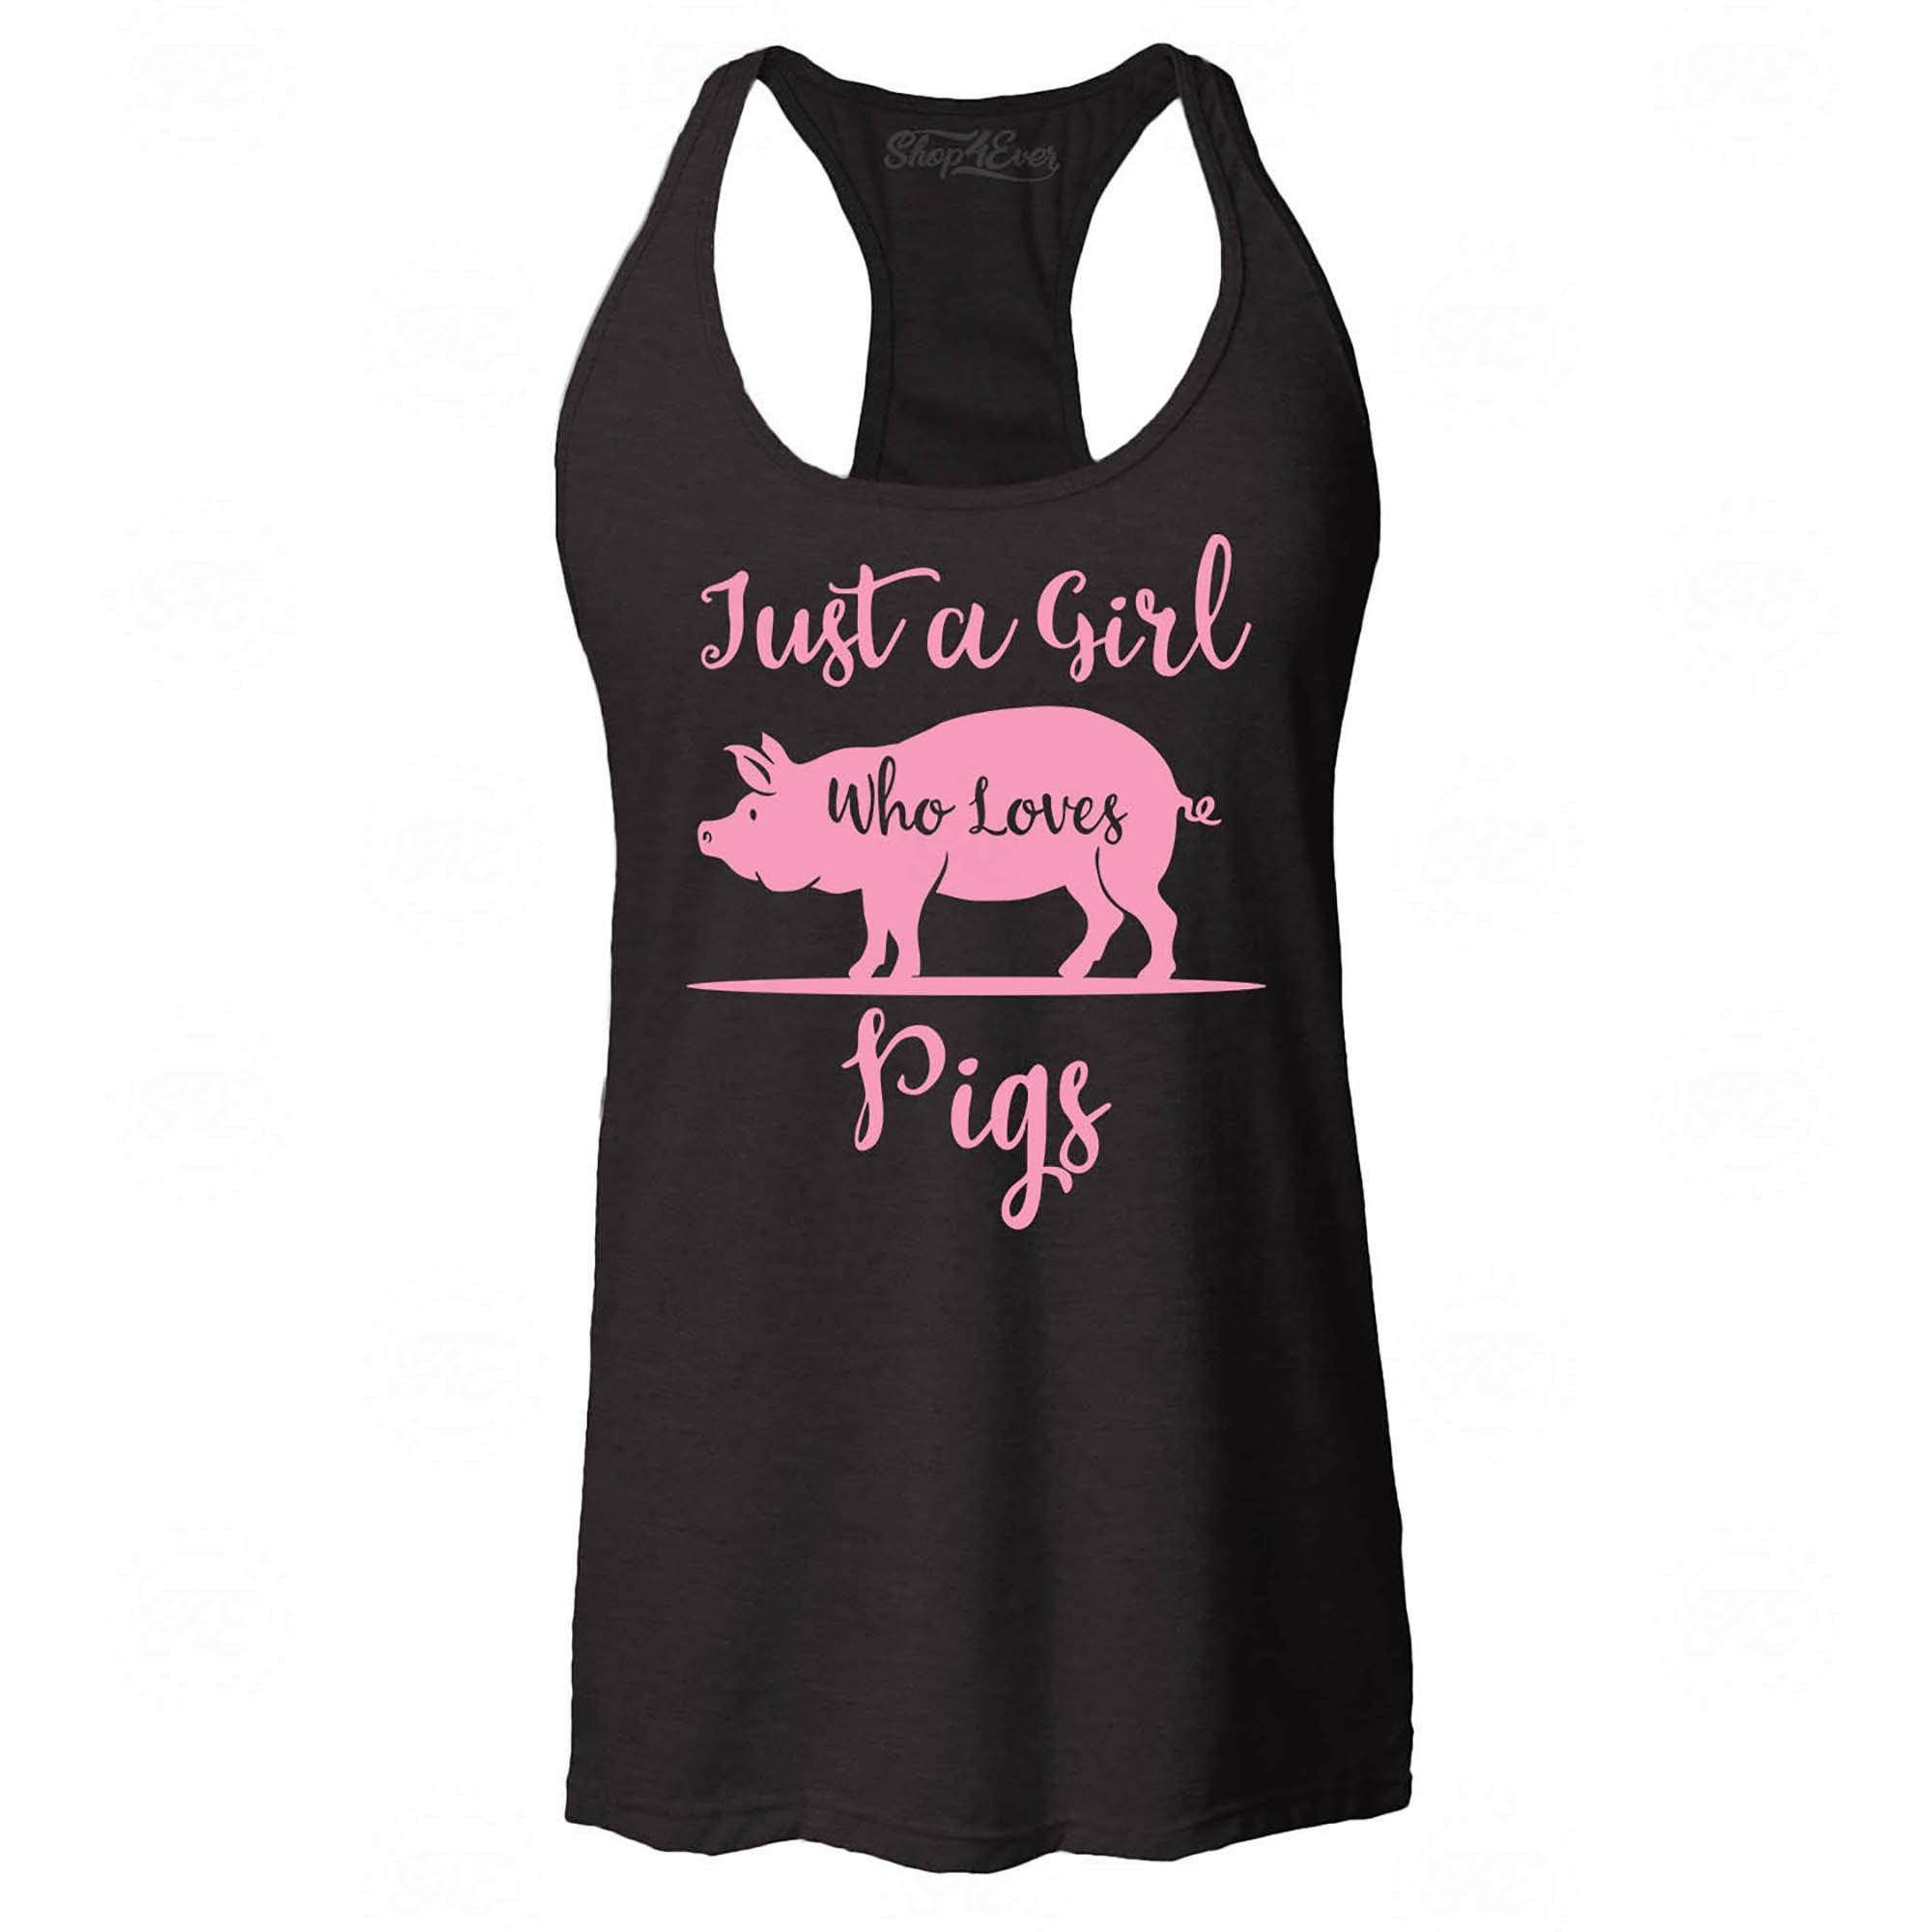 Just A Girl Who Loves Pigs Women's Racerback Tank Top Slim Fit